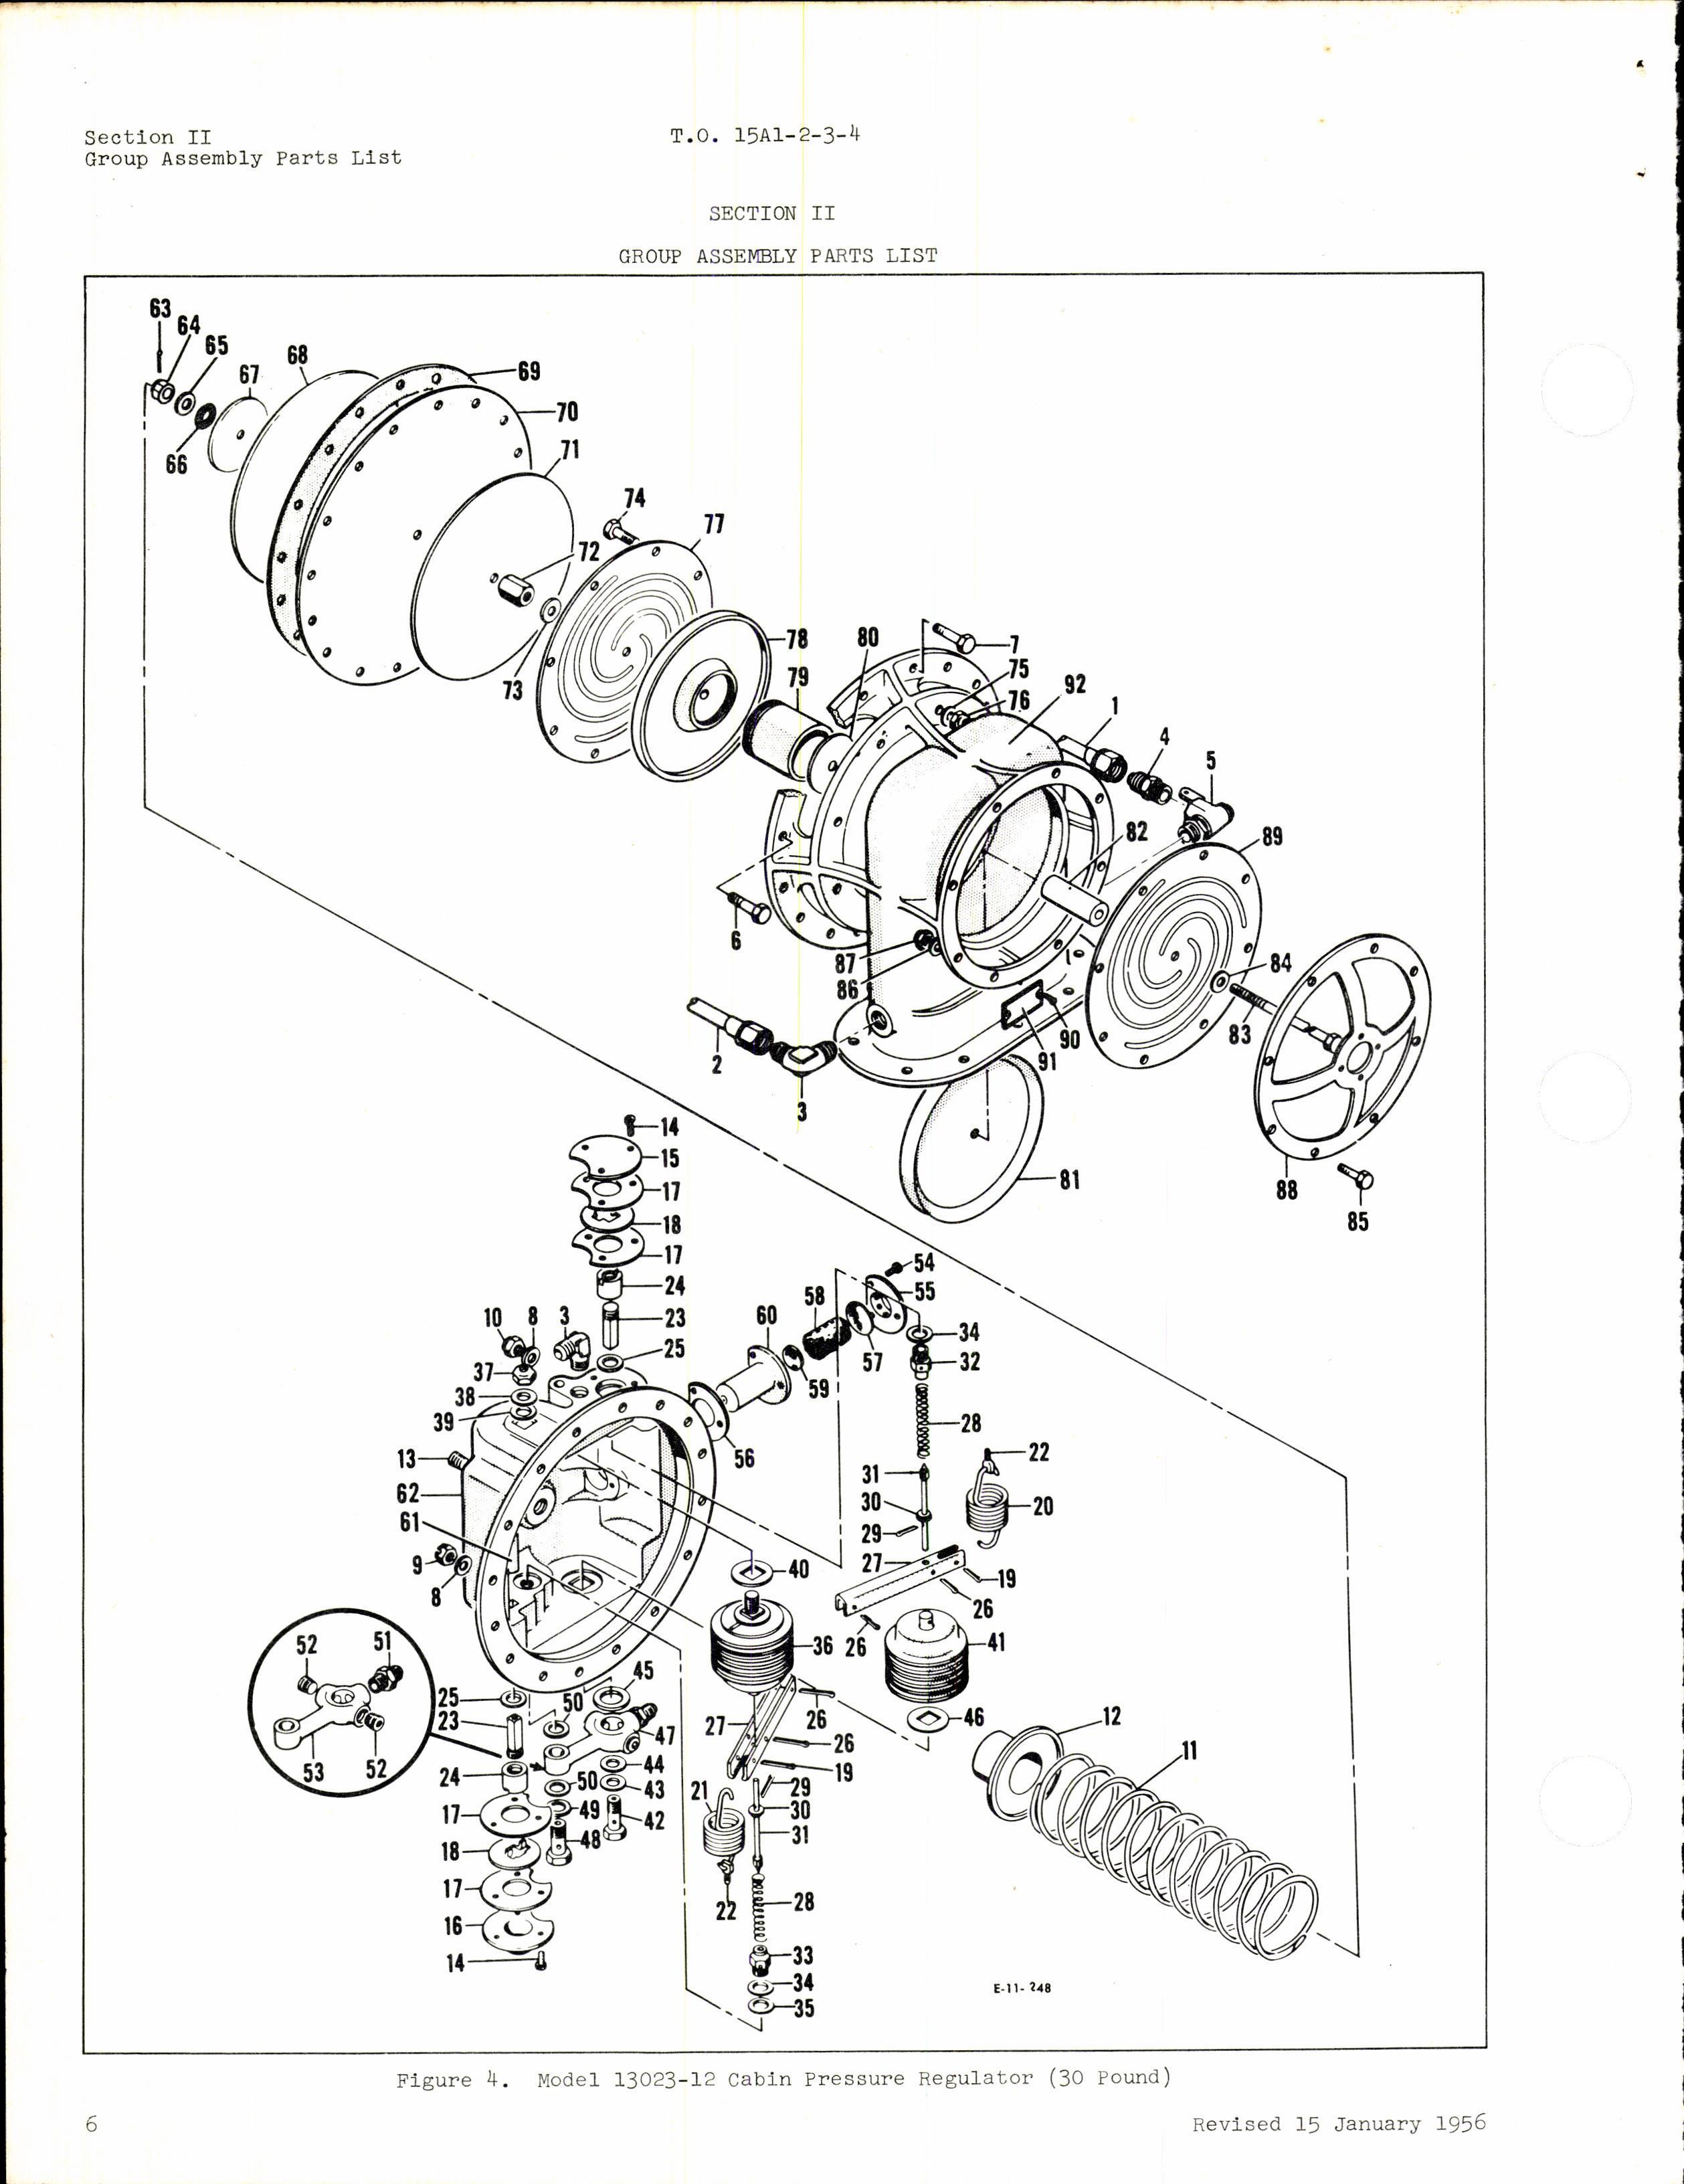 Sample page 10 from AirCorps Library document: Parts Catalog for Airesearch Cabin Pressure Regulators